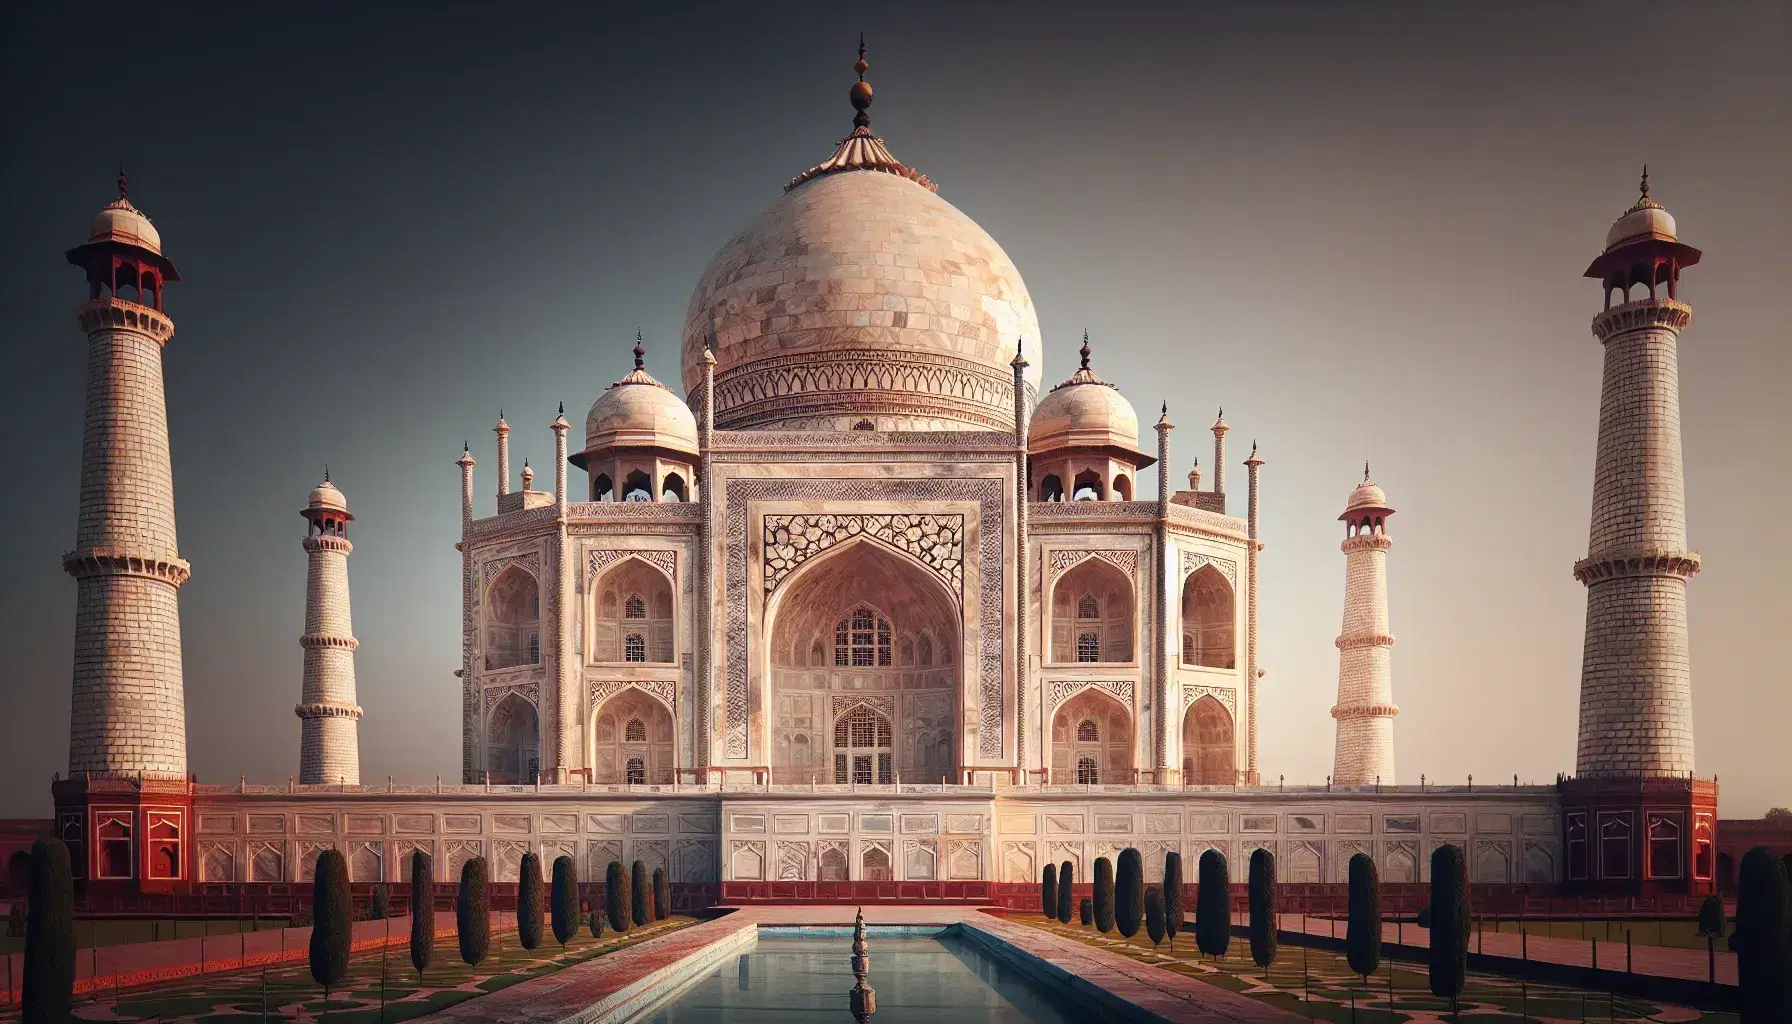 Taj Mahal under clear blue skies, white marble dome with lotus finial, flanked by red sandstone buildings, reflected in long pool amidst lush gardens.